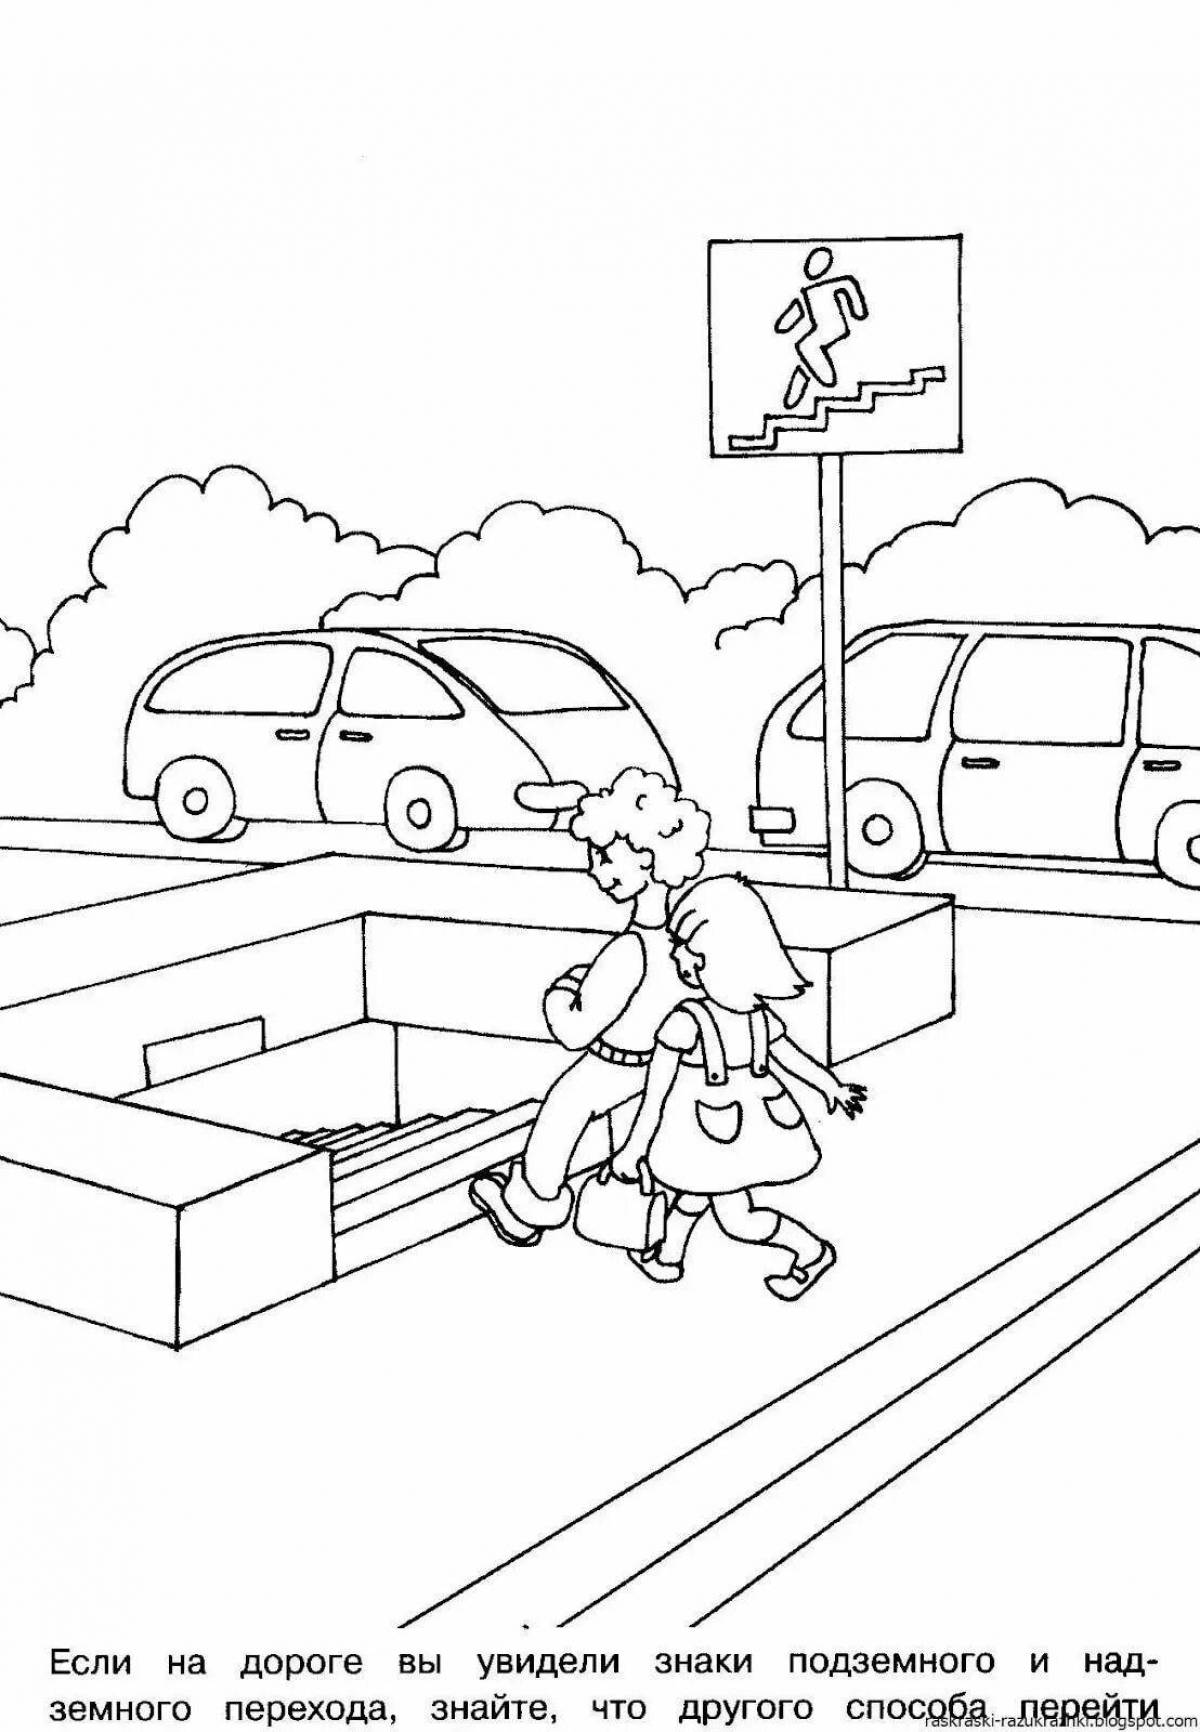 Funny coloring book of the rules of the road for kindergarten